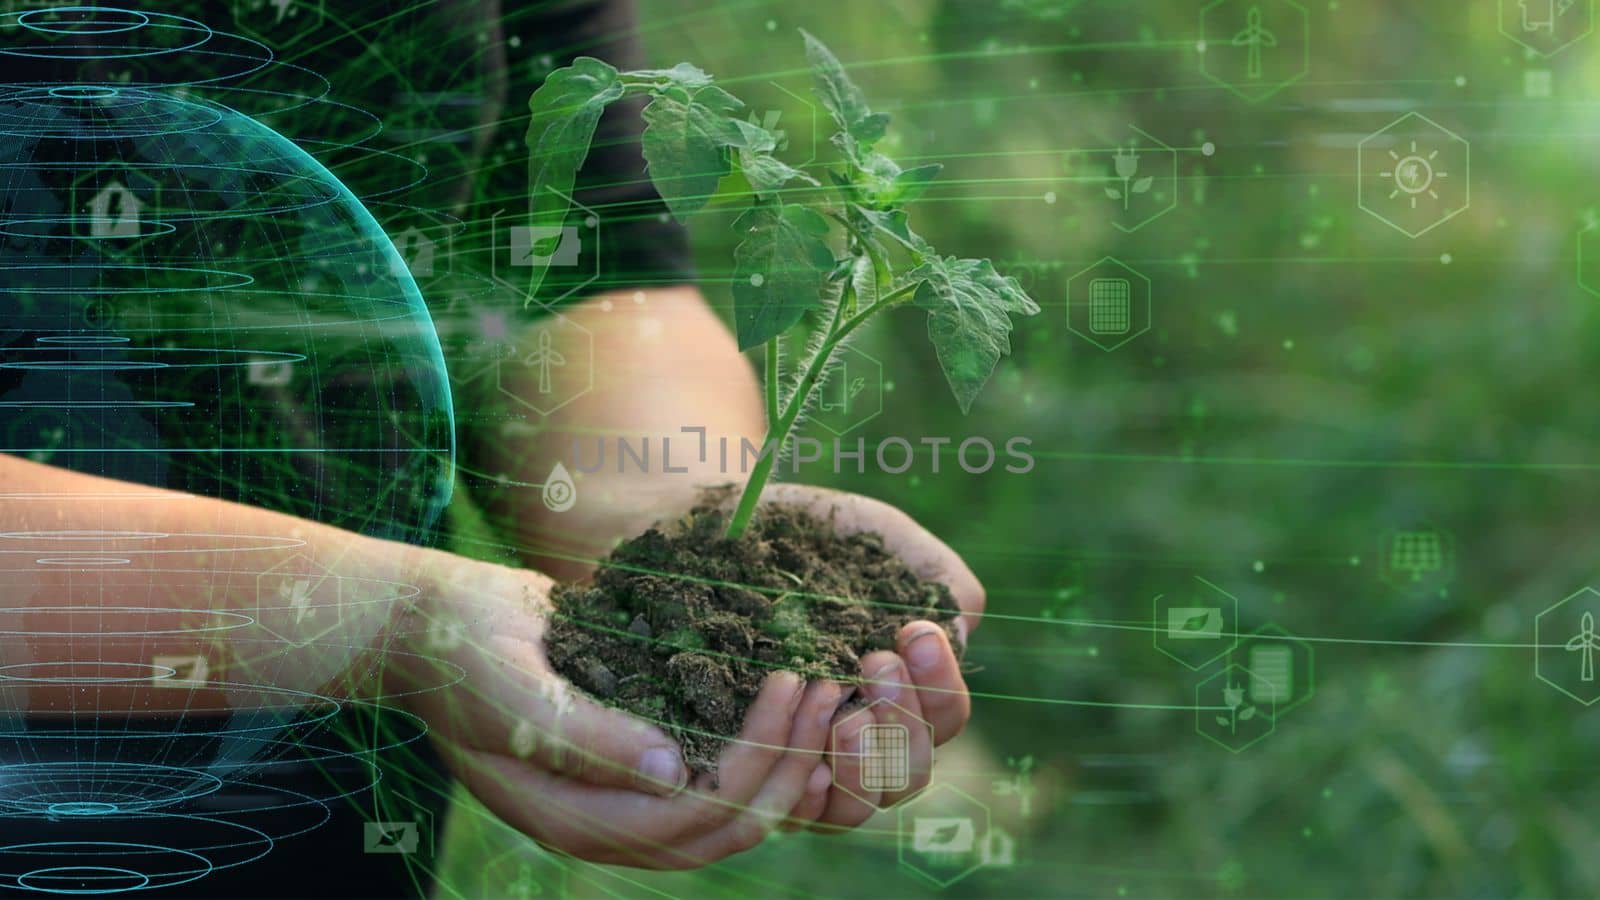 close up hands holding sapling of young oak tree. palms embrace the soil stem a small tree. blurred green background, black shirt. concept nature conservation, Earth protection, reforestation by senkaya